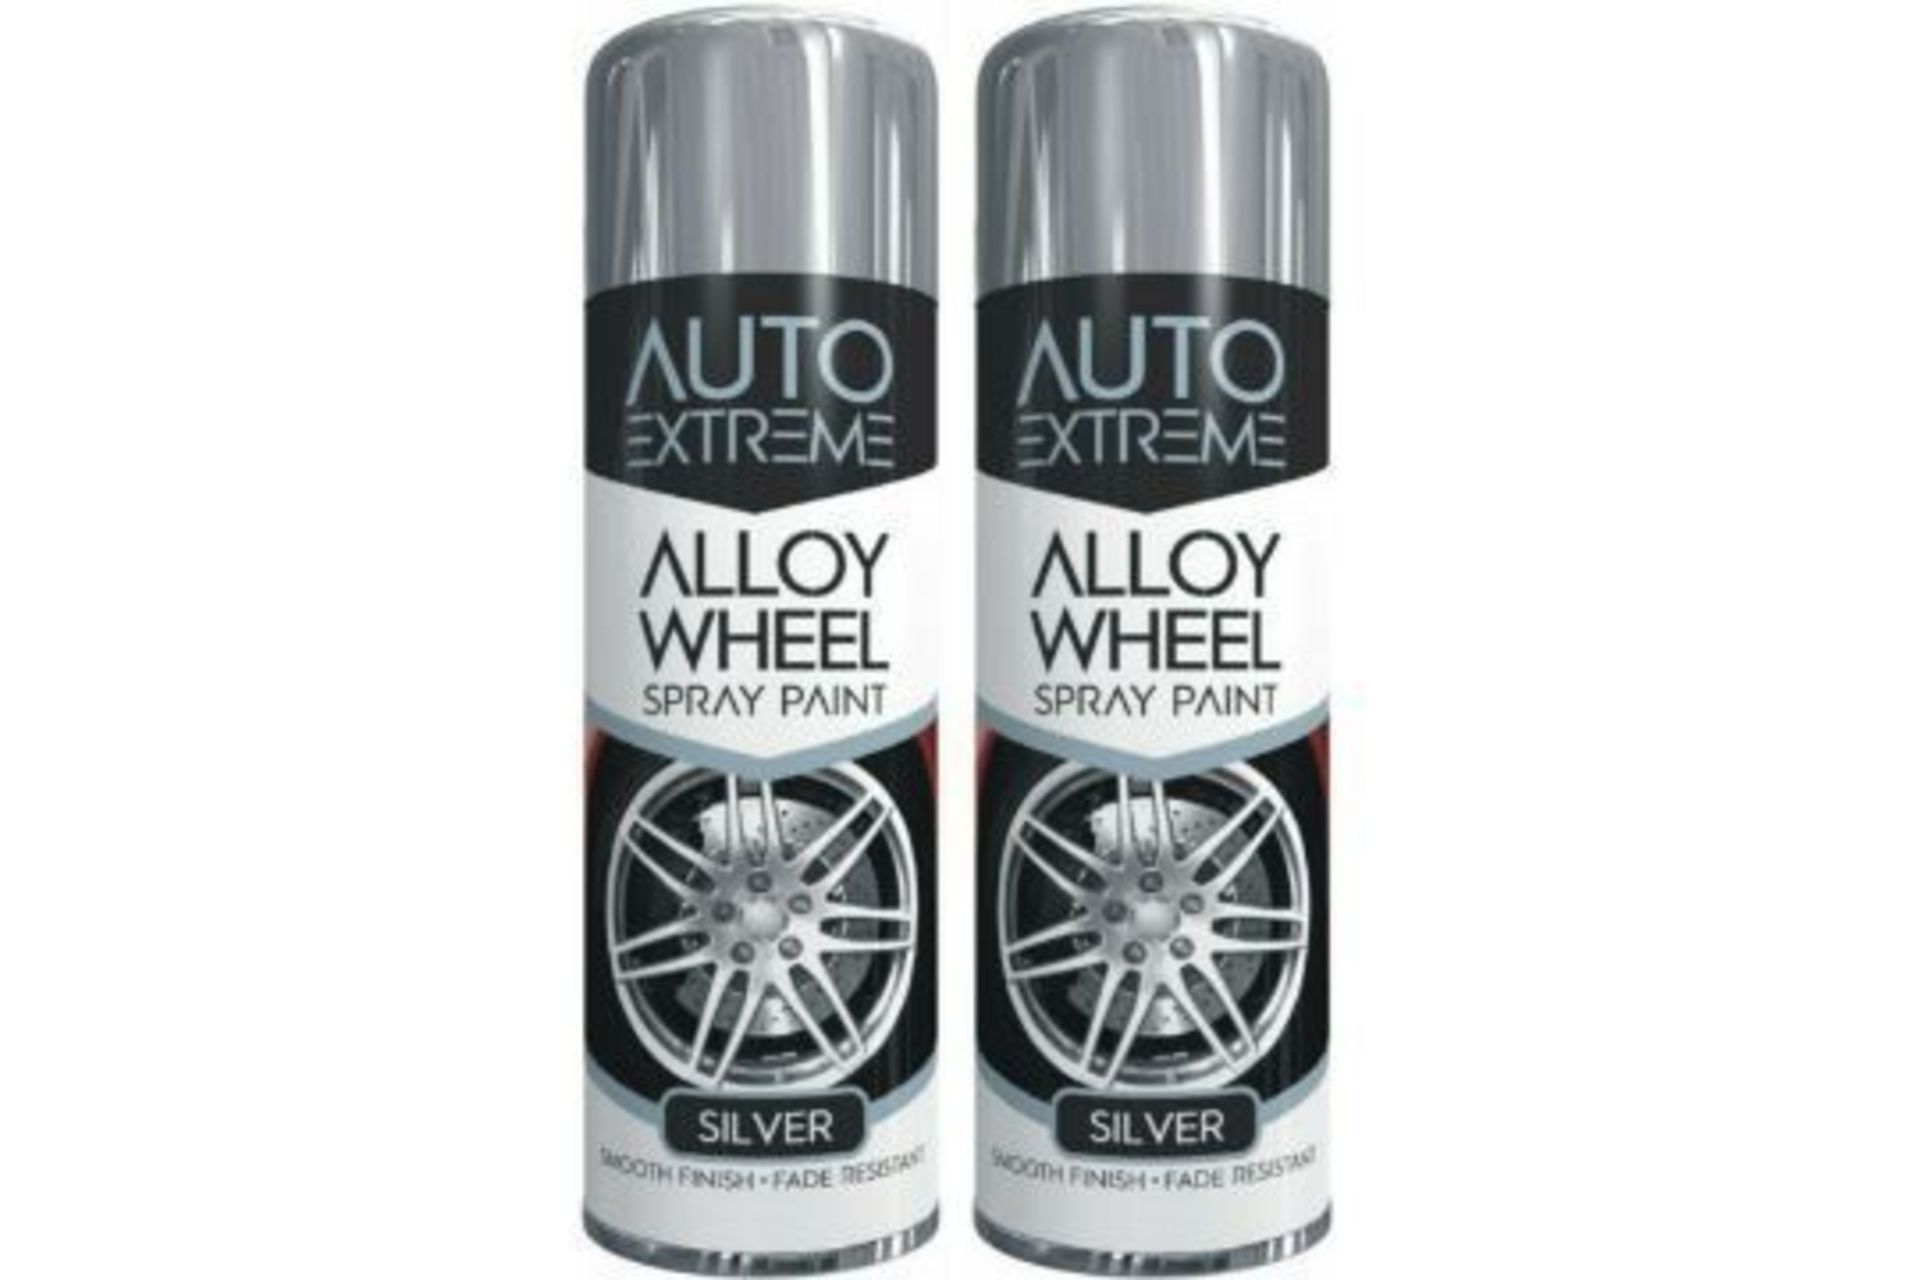 x2 Cans Alloy Paint Spray Silver Wheel Restorer Car Auto Paint Can